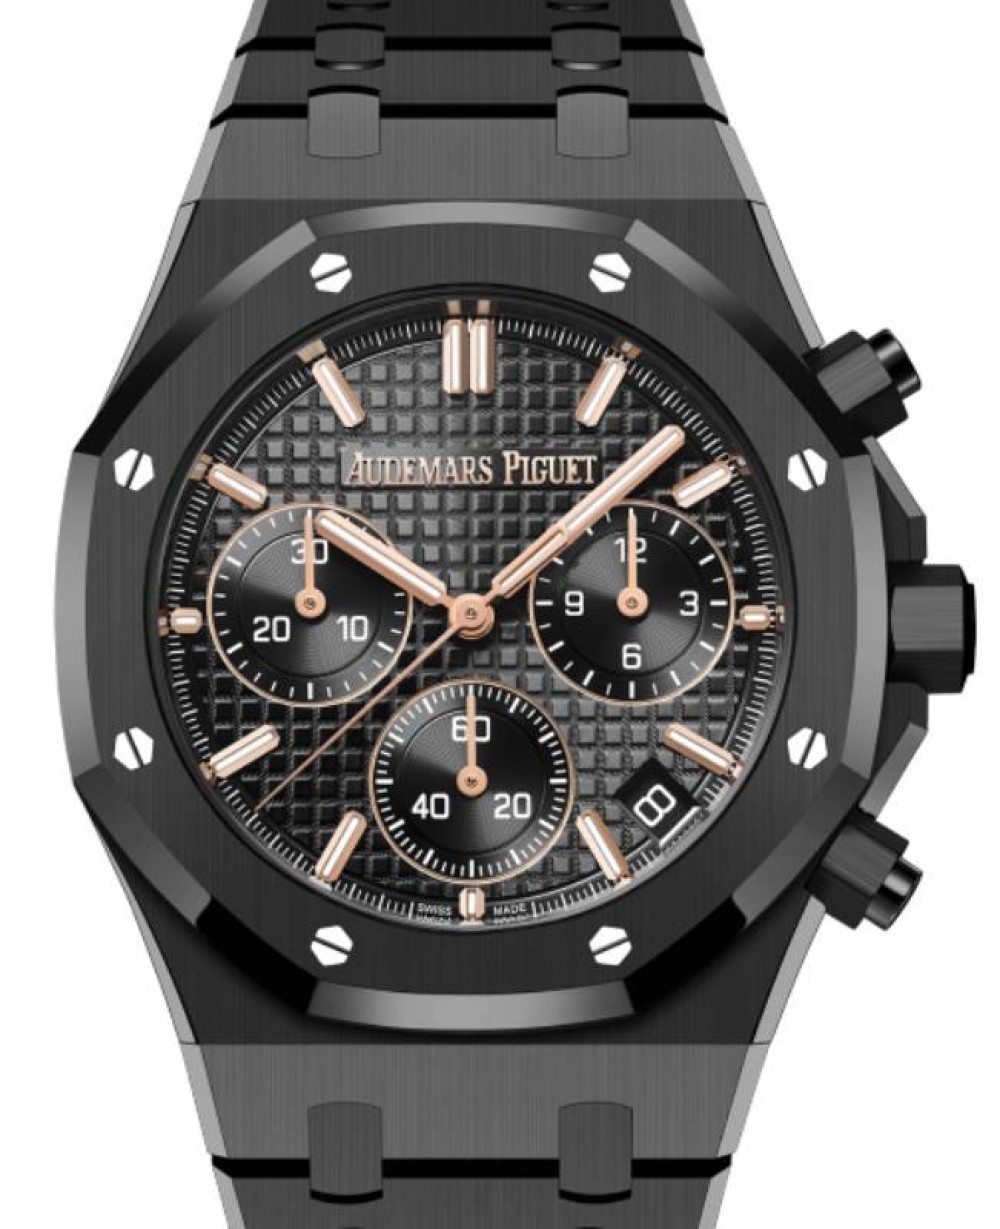 Audemars Piguet Royal Oak 41mm Stainless Steel Black Dial for $43,500 for  sale from a Trusted Seller on Chrono24